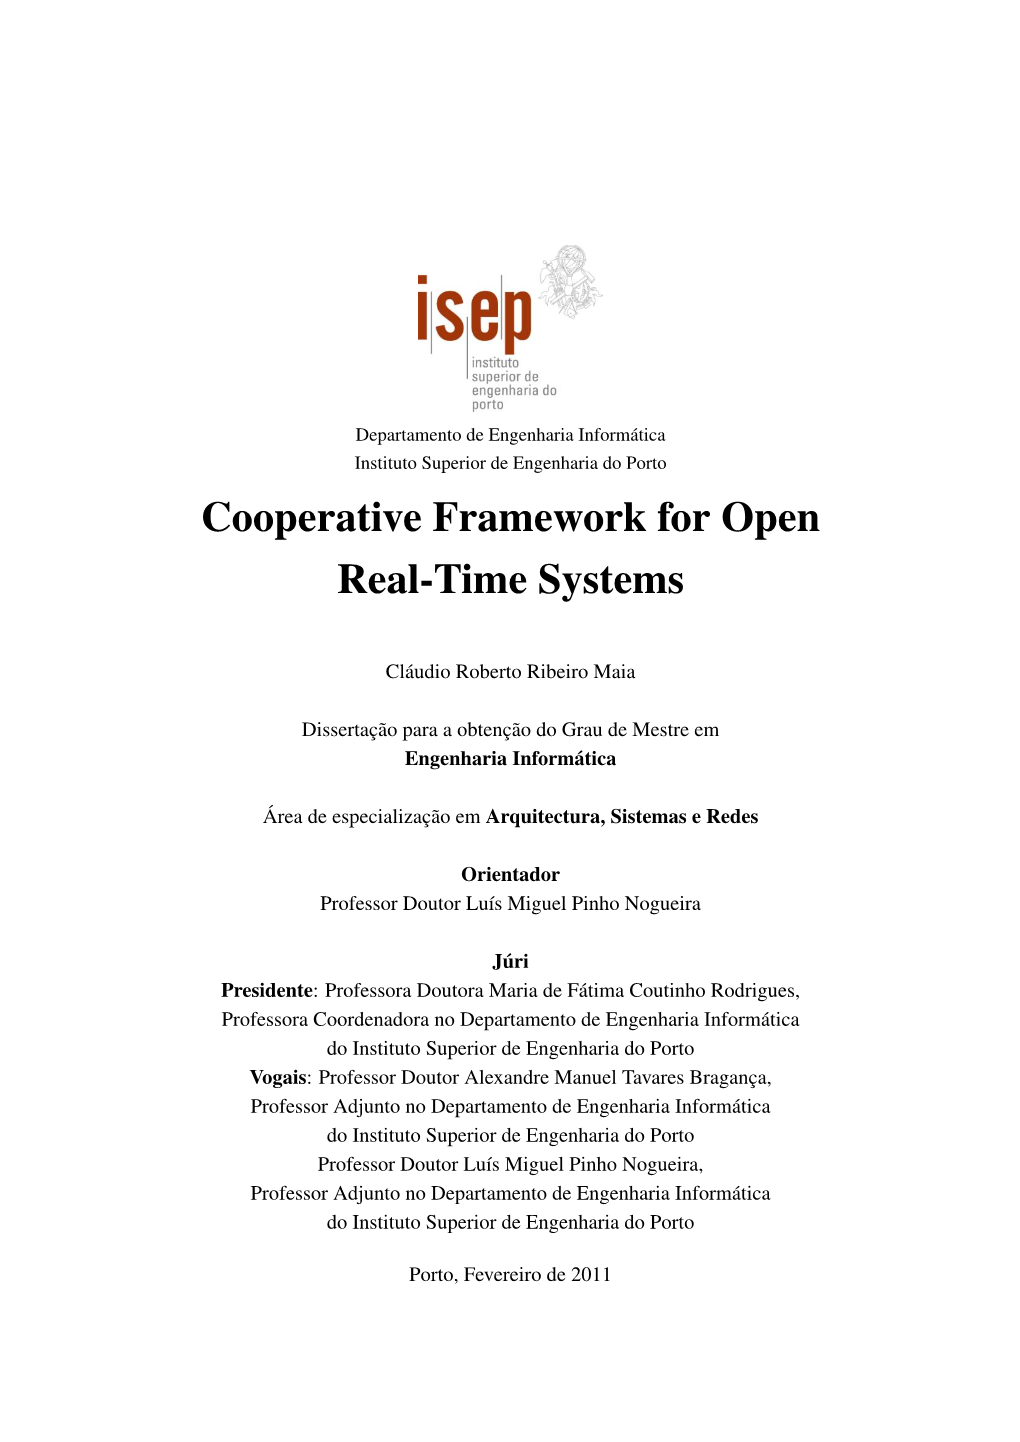 Cooperative Framework for Open Real-Time Systems